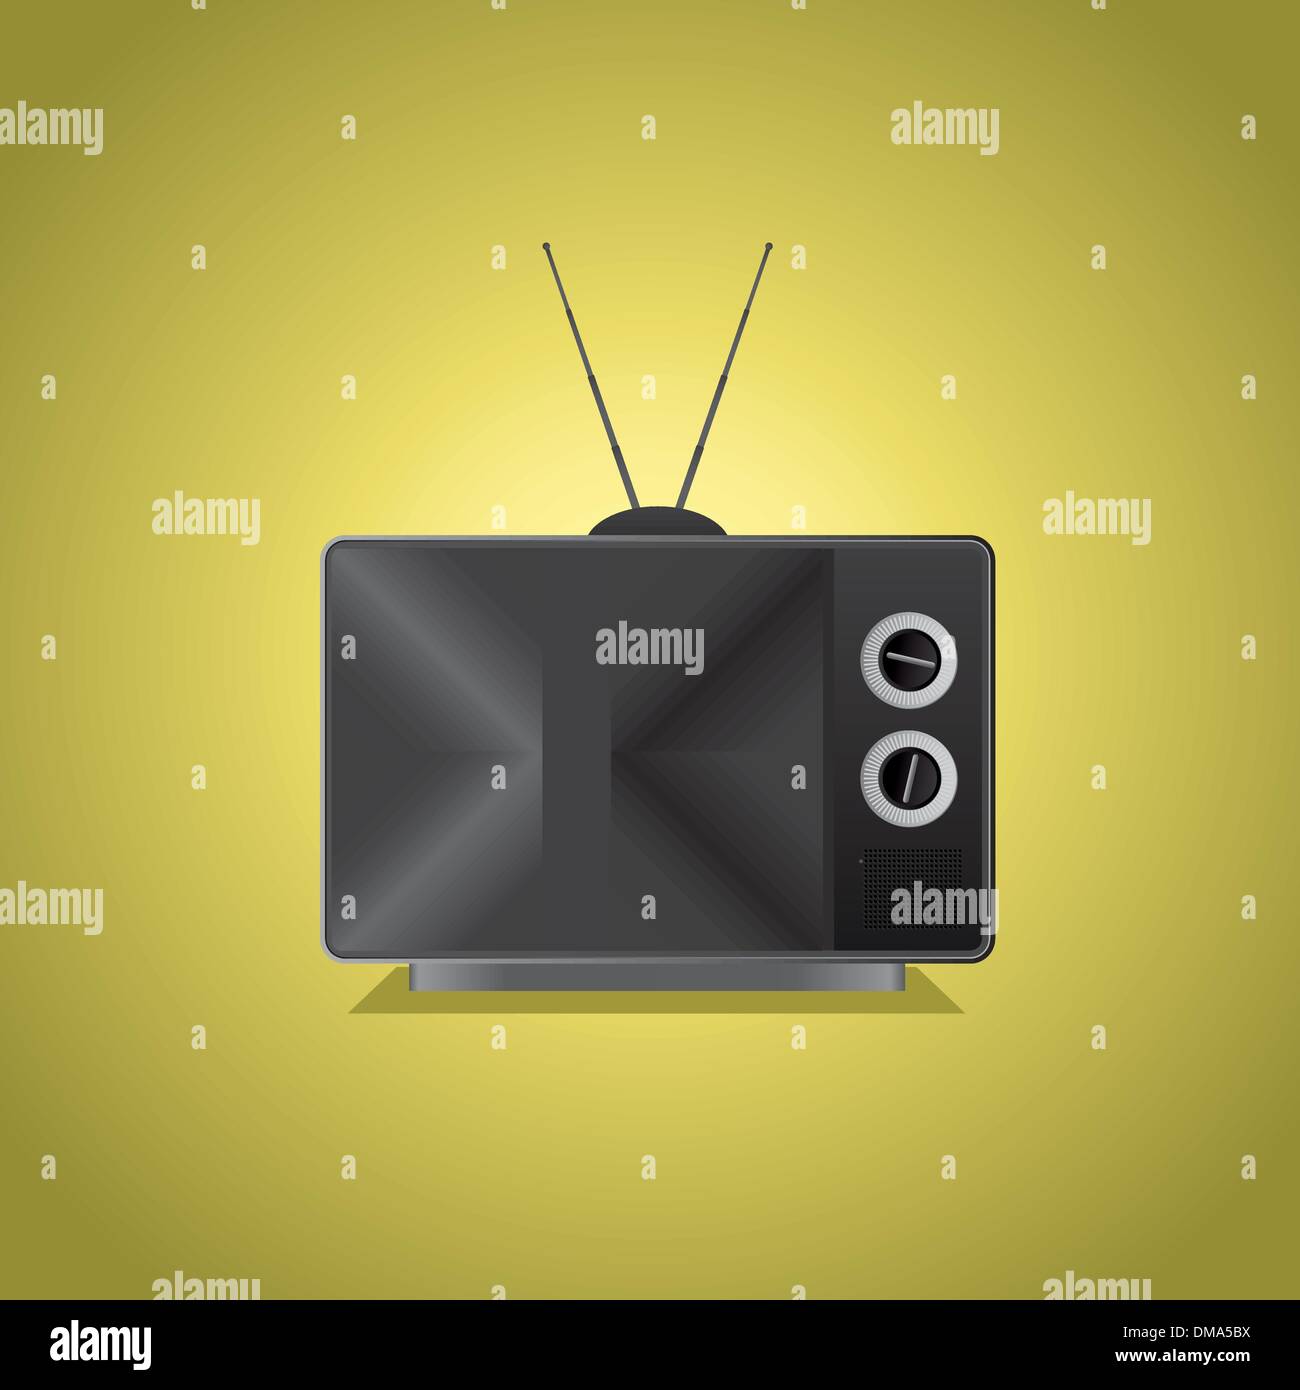 Old TV with No Signal Stock Vector